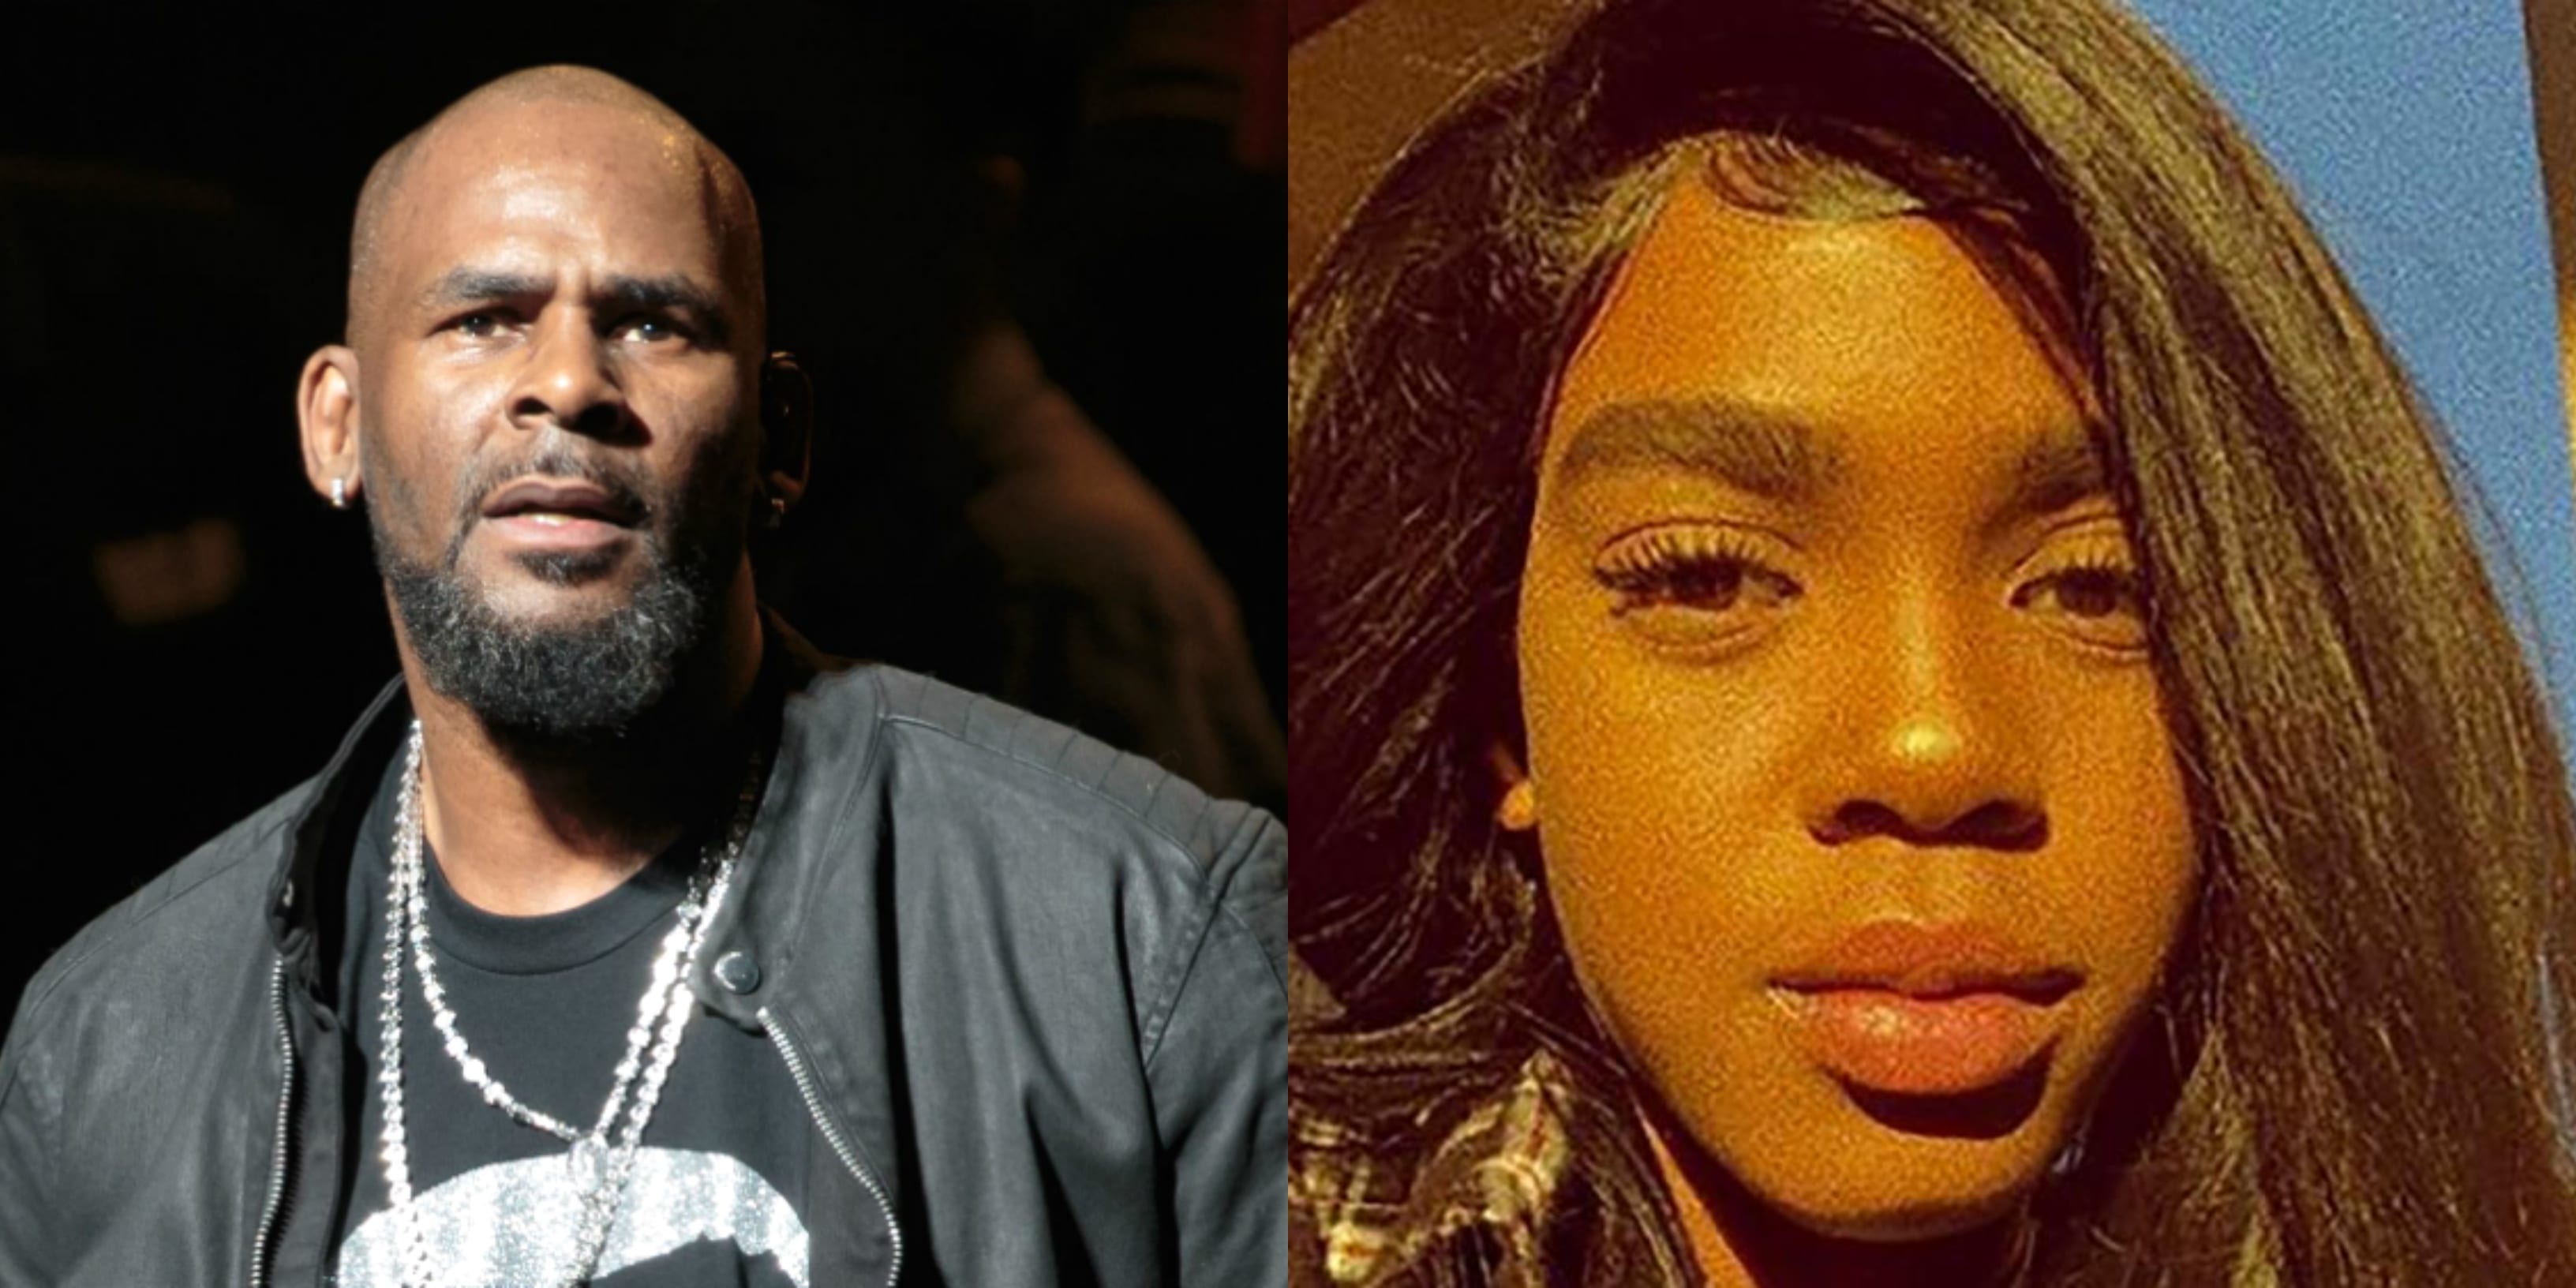 R. Kelly's Daughter Breaks her Silence: 'I Do Not Have a Relationship With My Father'